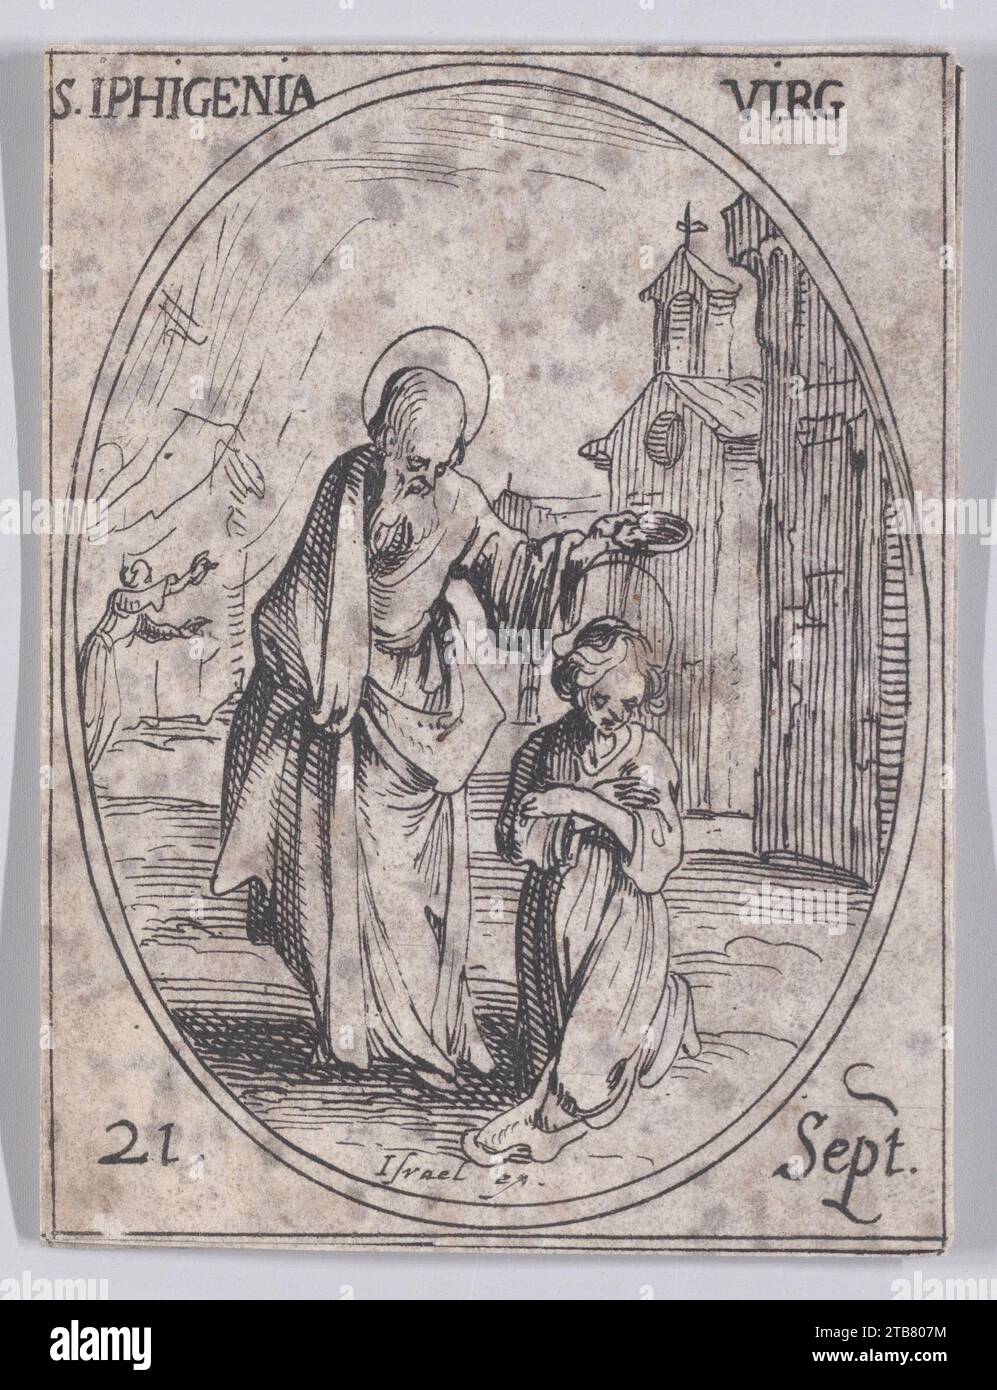 S. Iphigenie, vierge (St. Iphigenia, Virgin), September 21st, from 'Les Images De Tous Les Saincts et Saintes de L'Annee' (Images of All of the Saints and Religious Events of the Year) 1917 by Jacques Callot Stock Photo